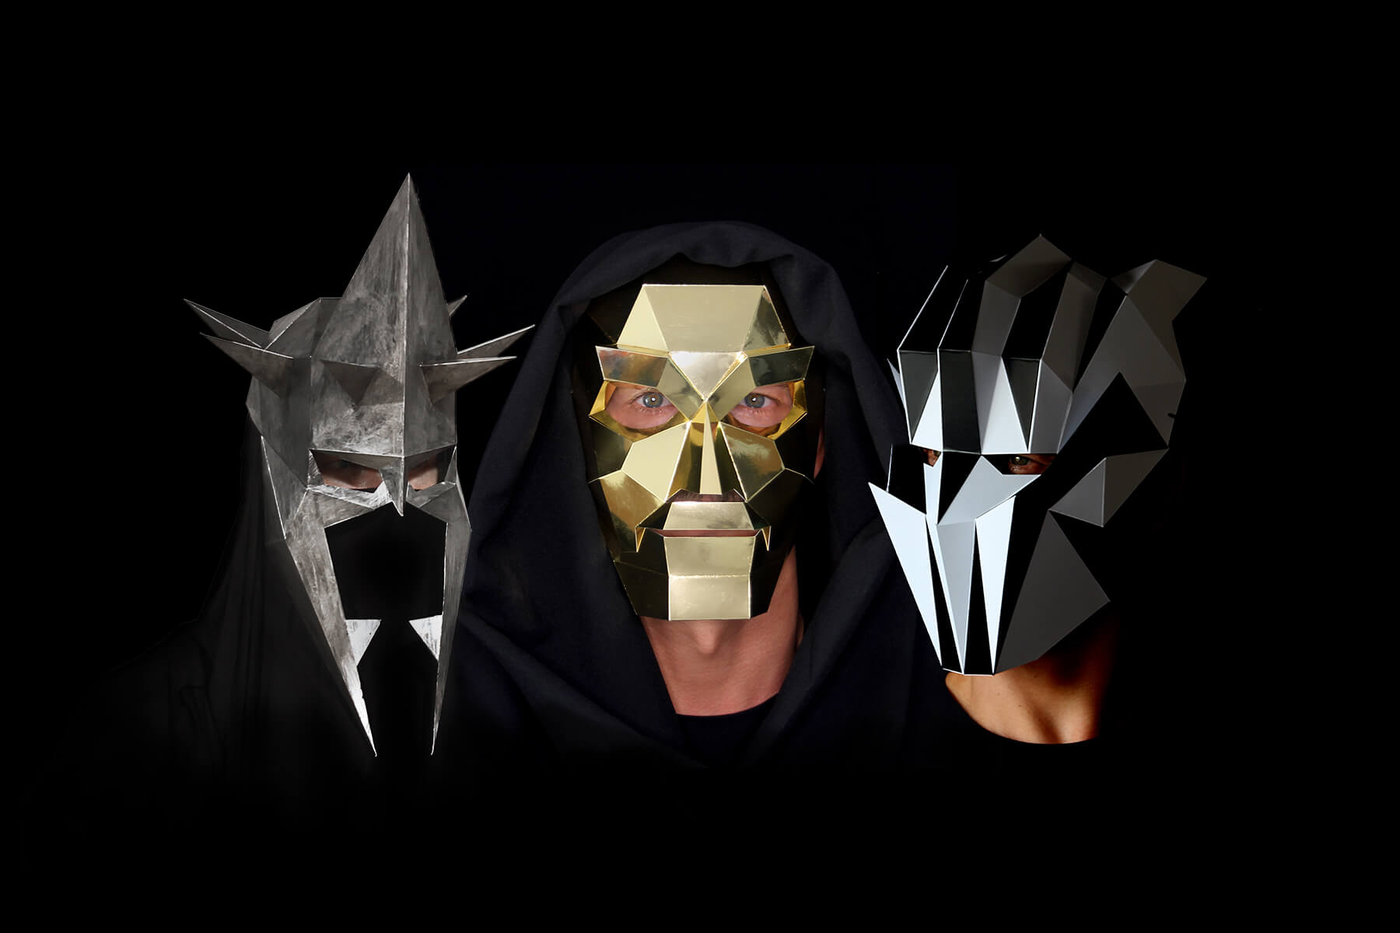 Cosplay Papercraft Masks Templates for low-poly geometric paper masks. Download the template and make your own mask with paper. Fantasy and Sci-fi Cosplay masks.